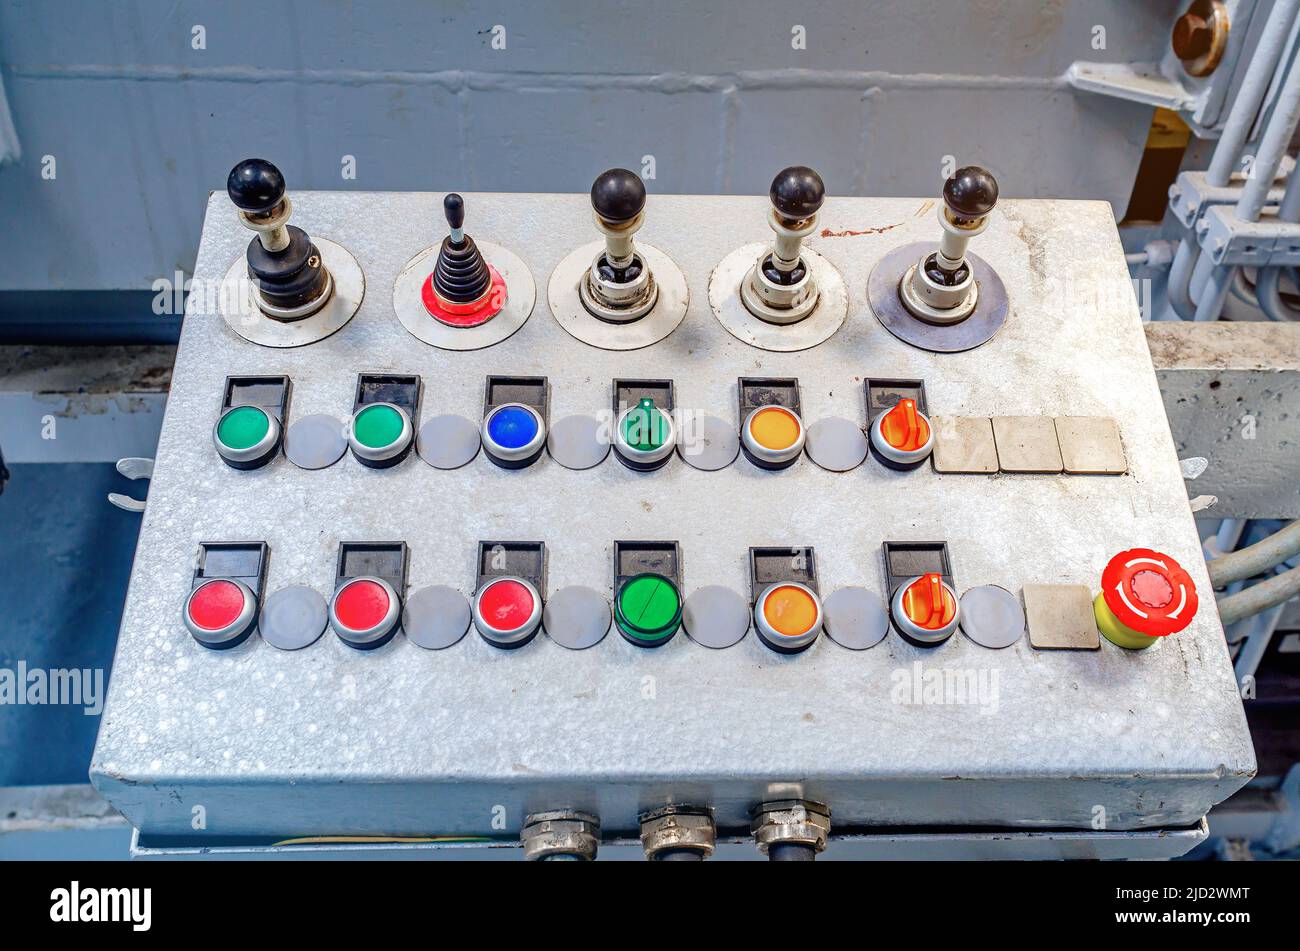 Control panel for machine. Production background. Buttons, toggle levers. Stock Photo